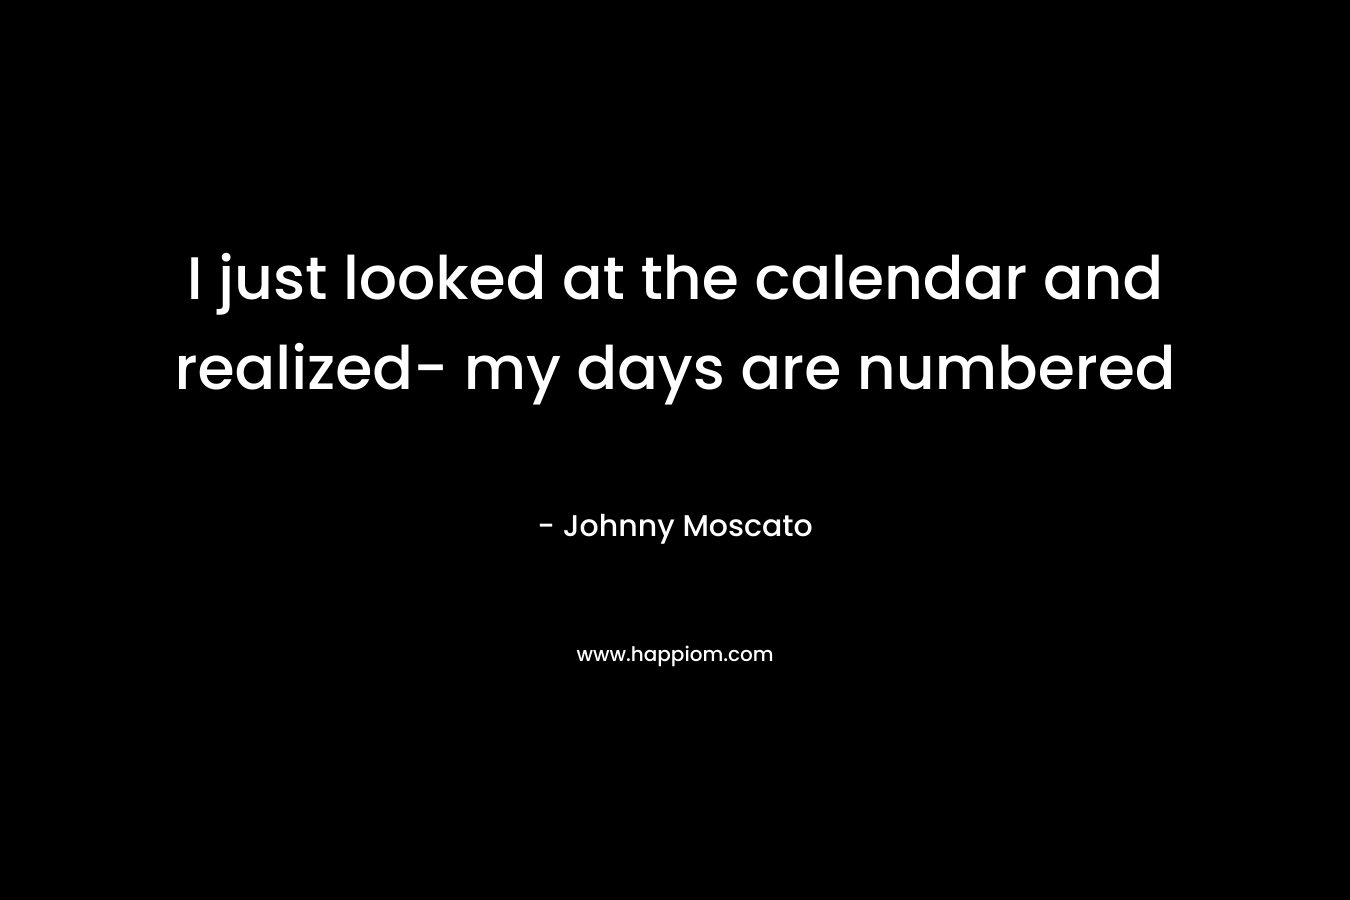 I just looked at the calendar and realized- my days are numbered – Johnny Moscato